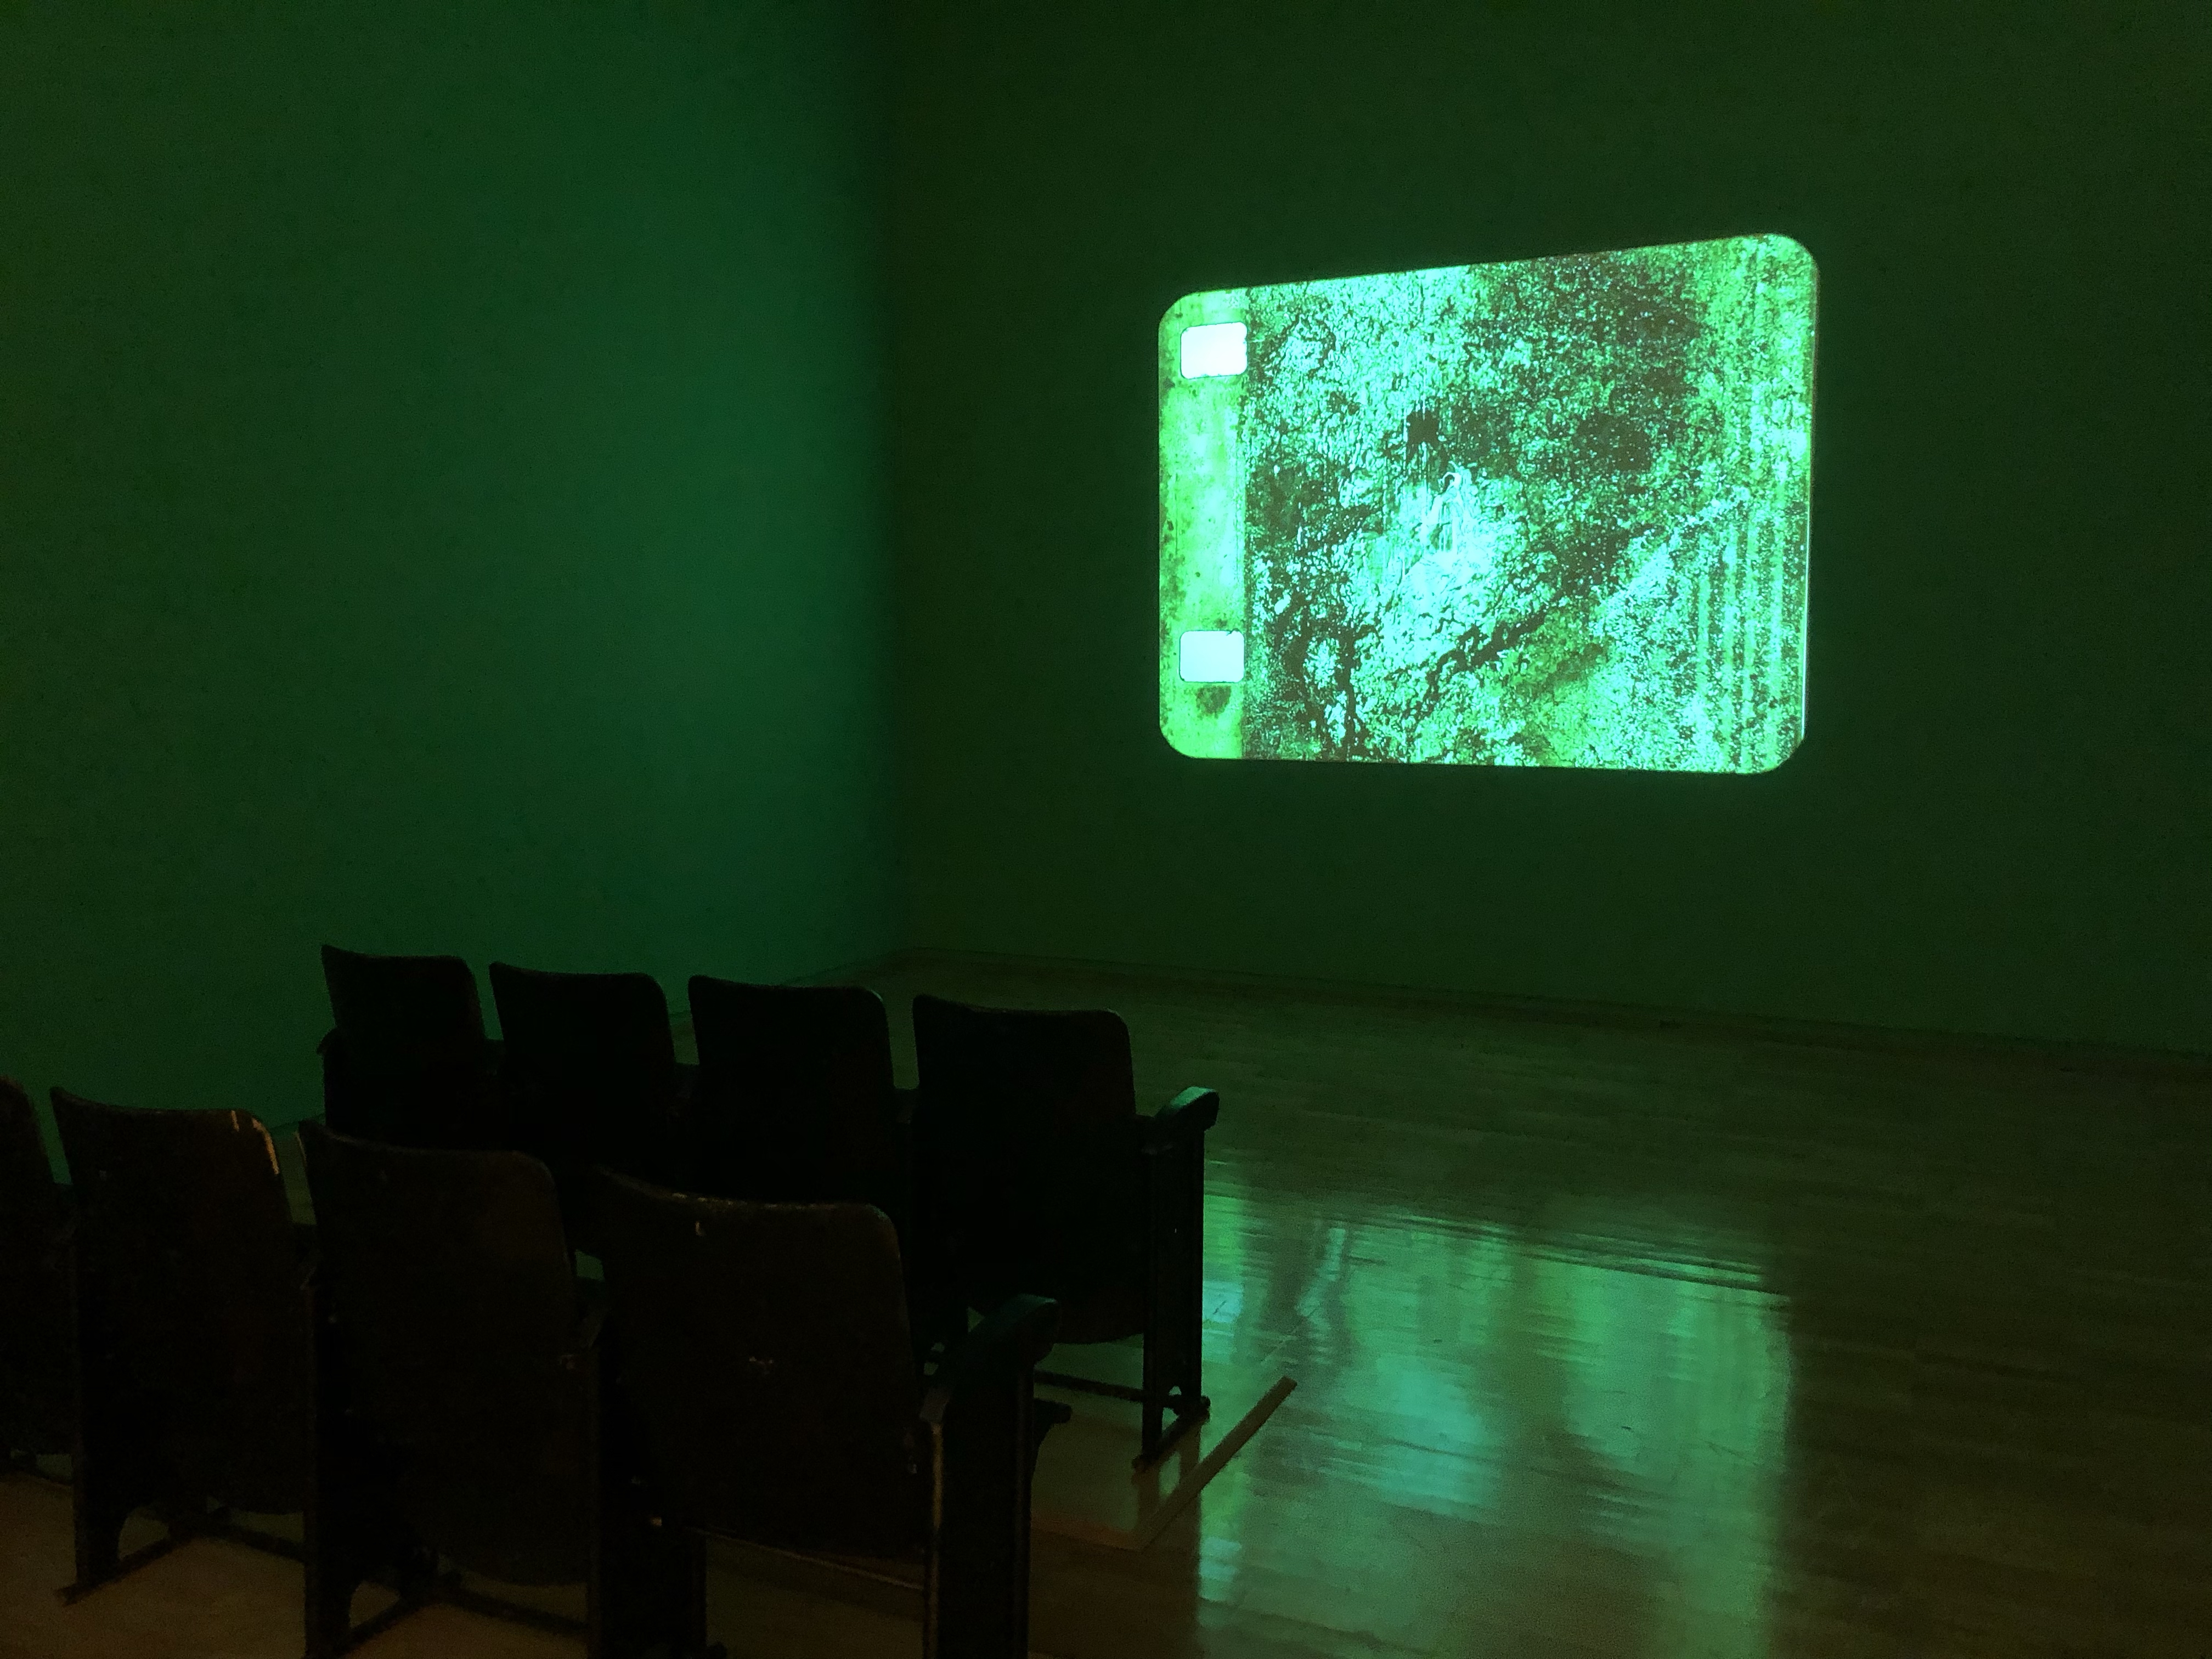 two rows of 4 seats on left face green tinged projected image on wall of green tinged room